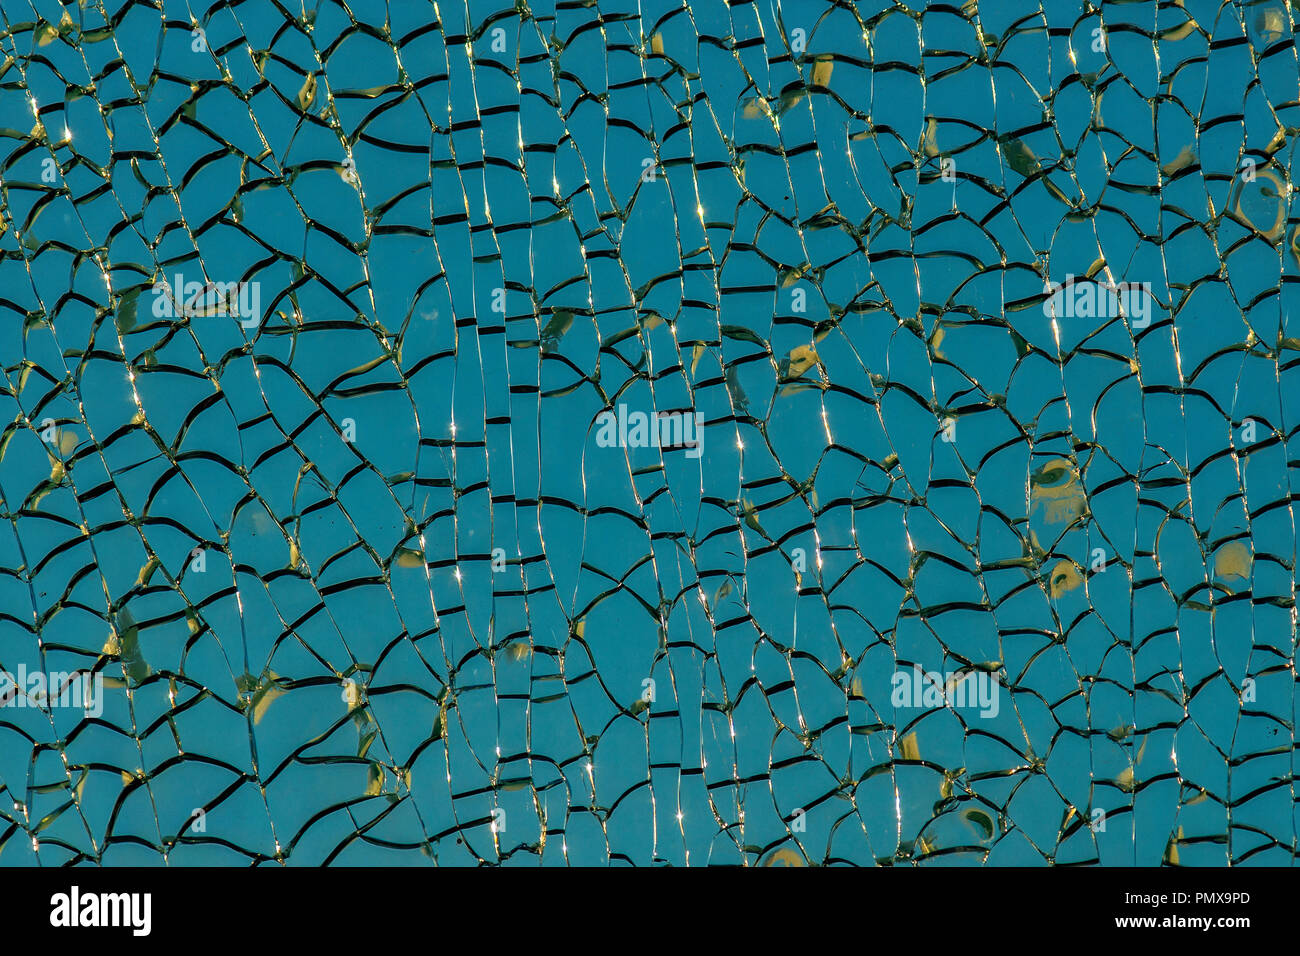 Pattern of ice or crackled glass. Shiny cracks, grunge surface. Blue and white colors. Decorative texture or background Stock Photo